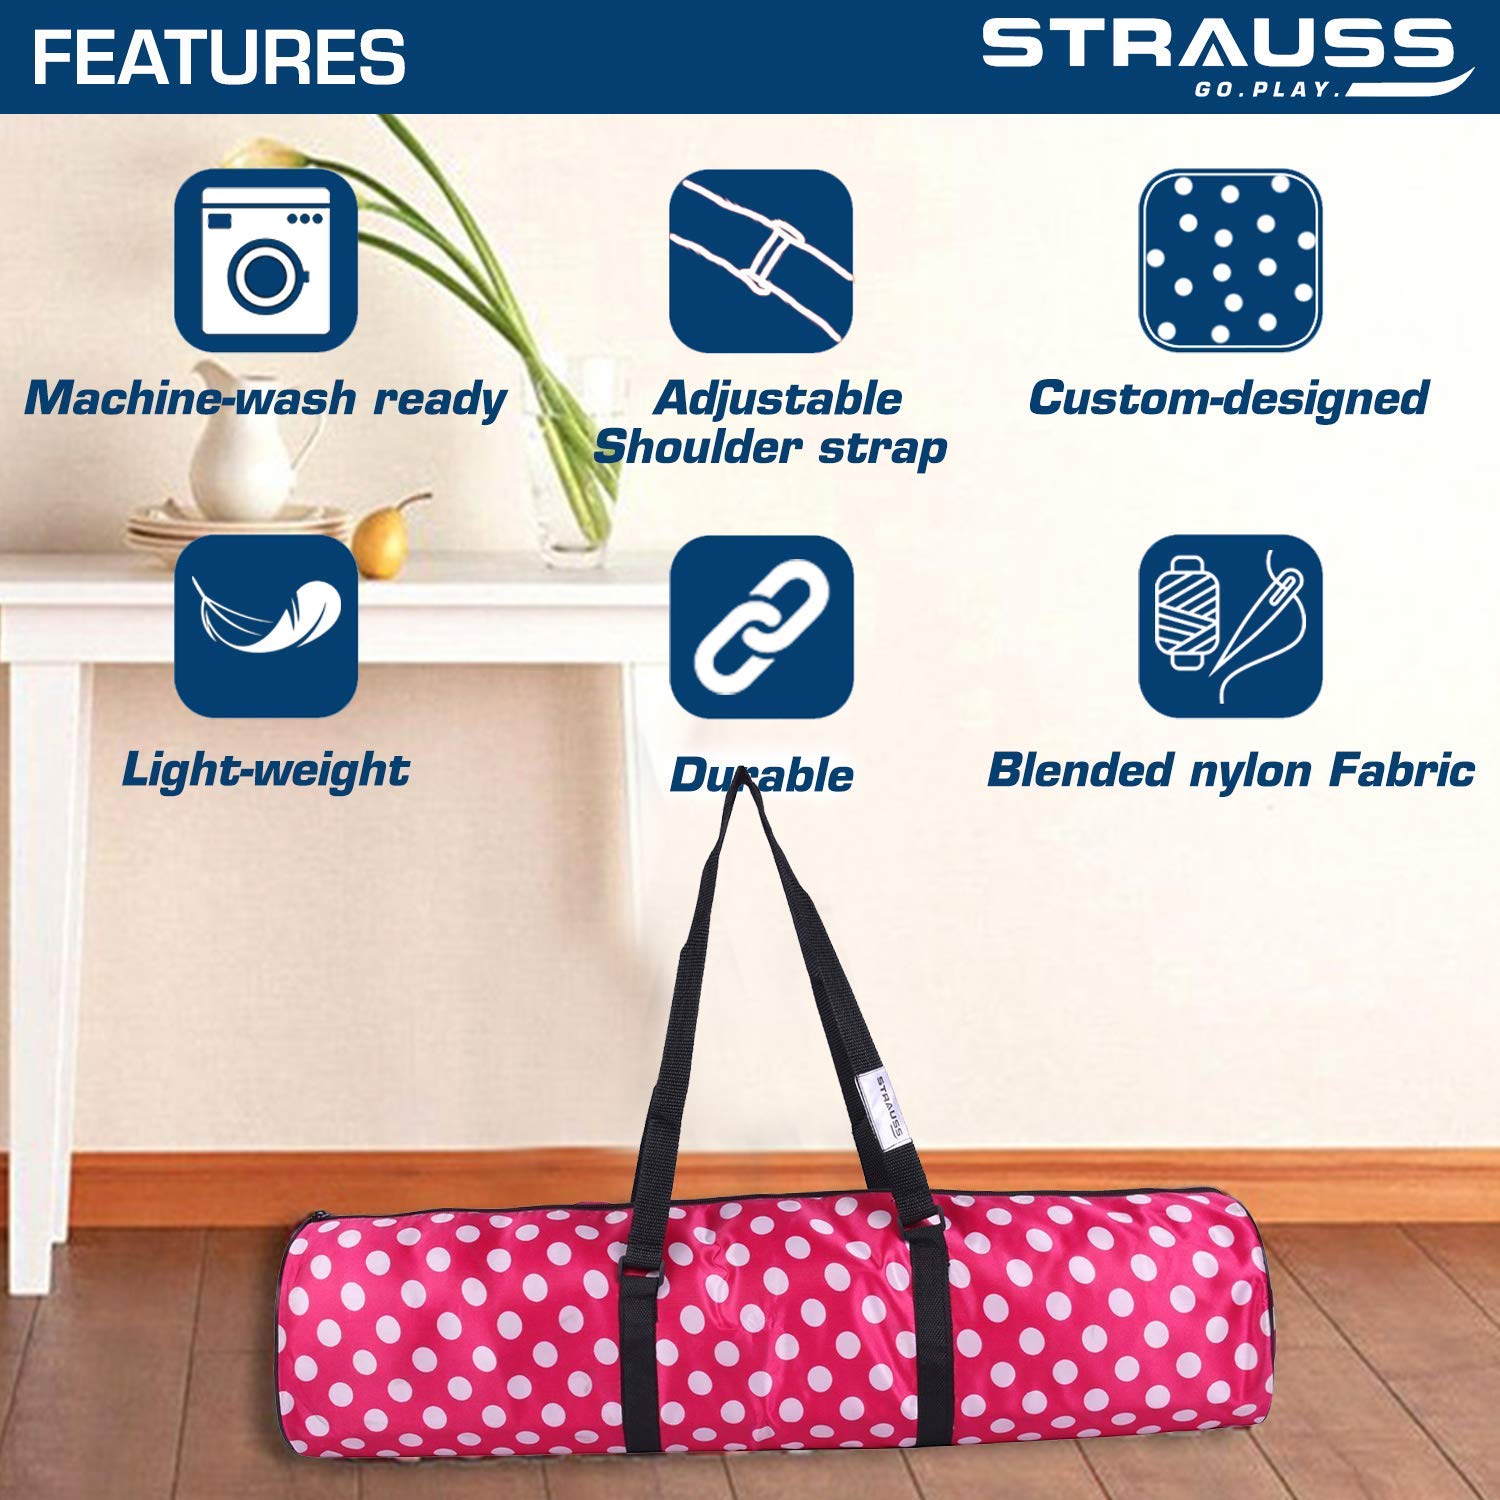 Strauss Yoga Mat 6MM (Floral Green) and Yoga Shoes, (Black)